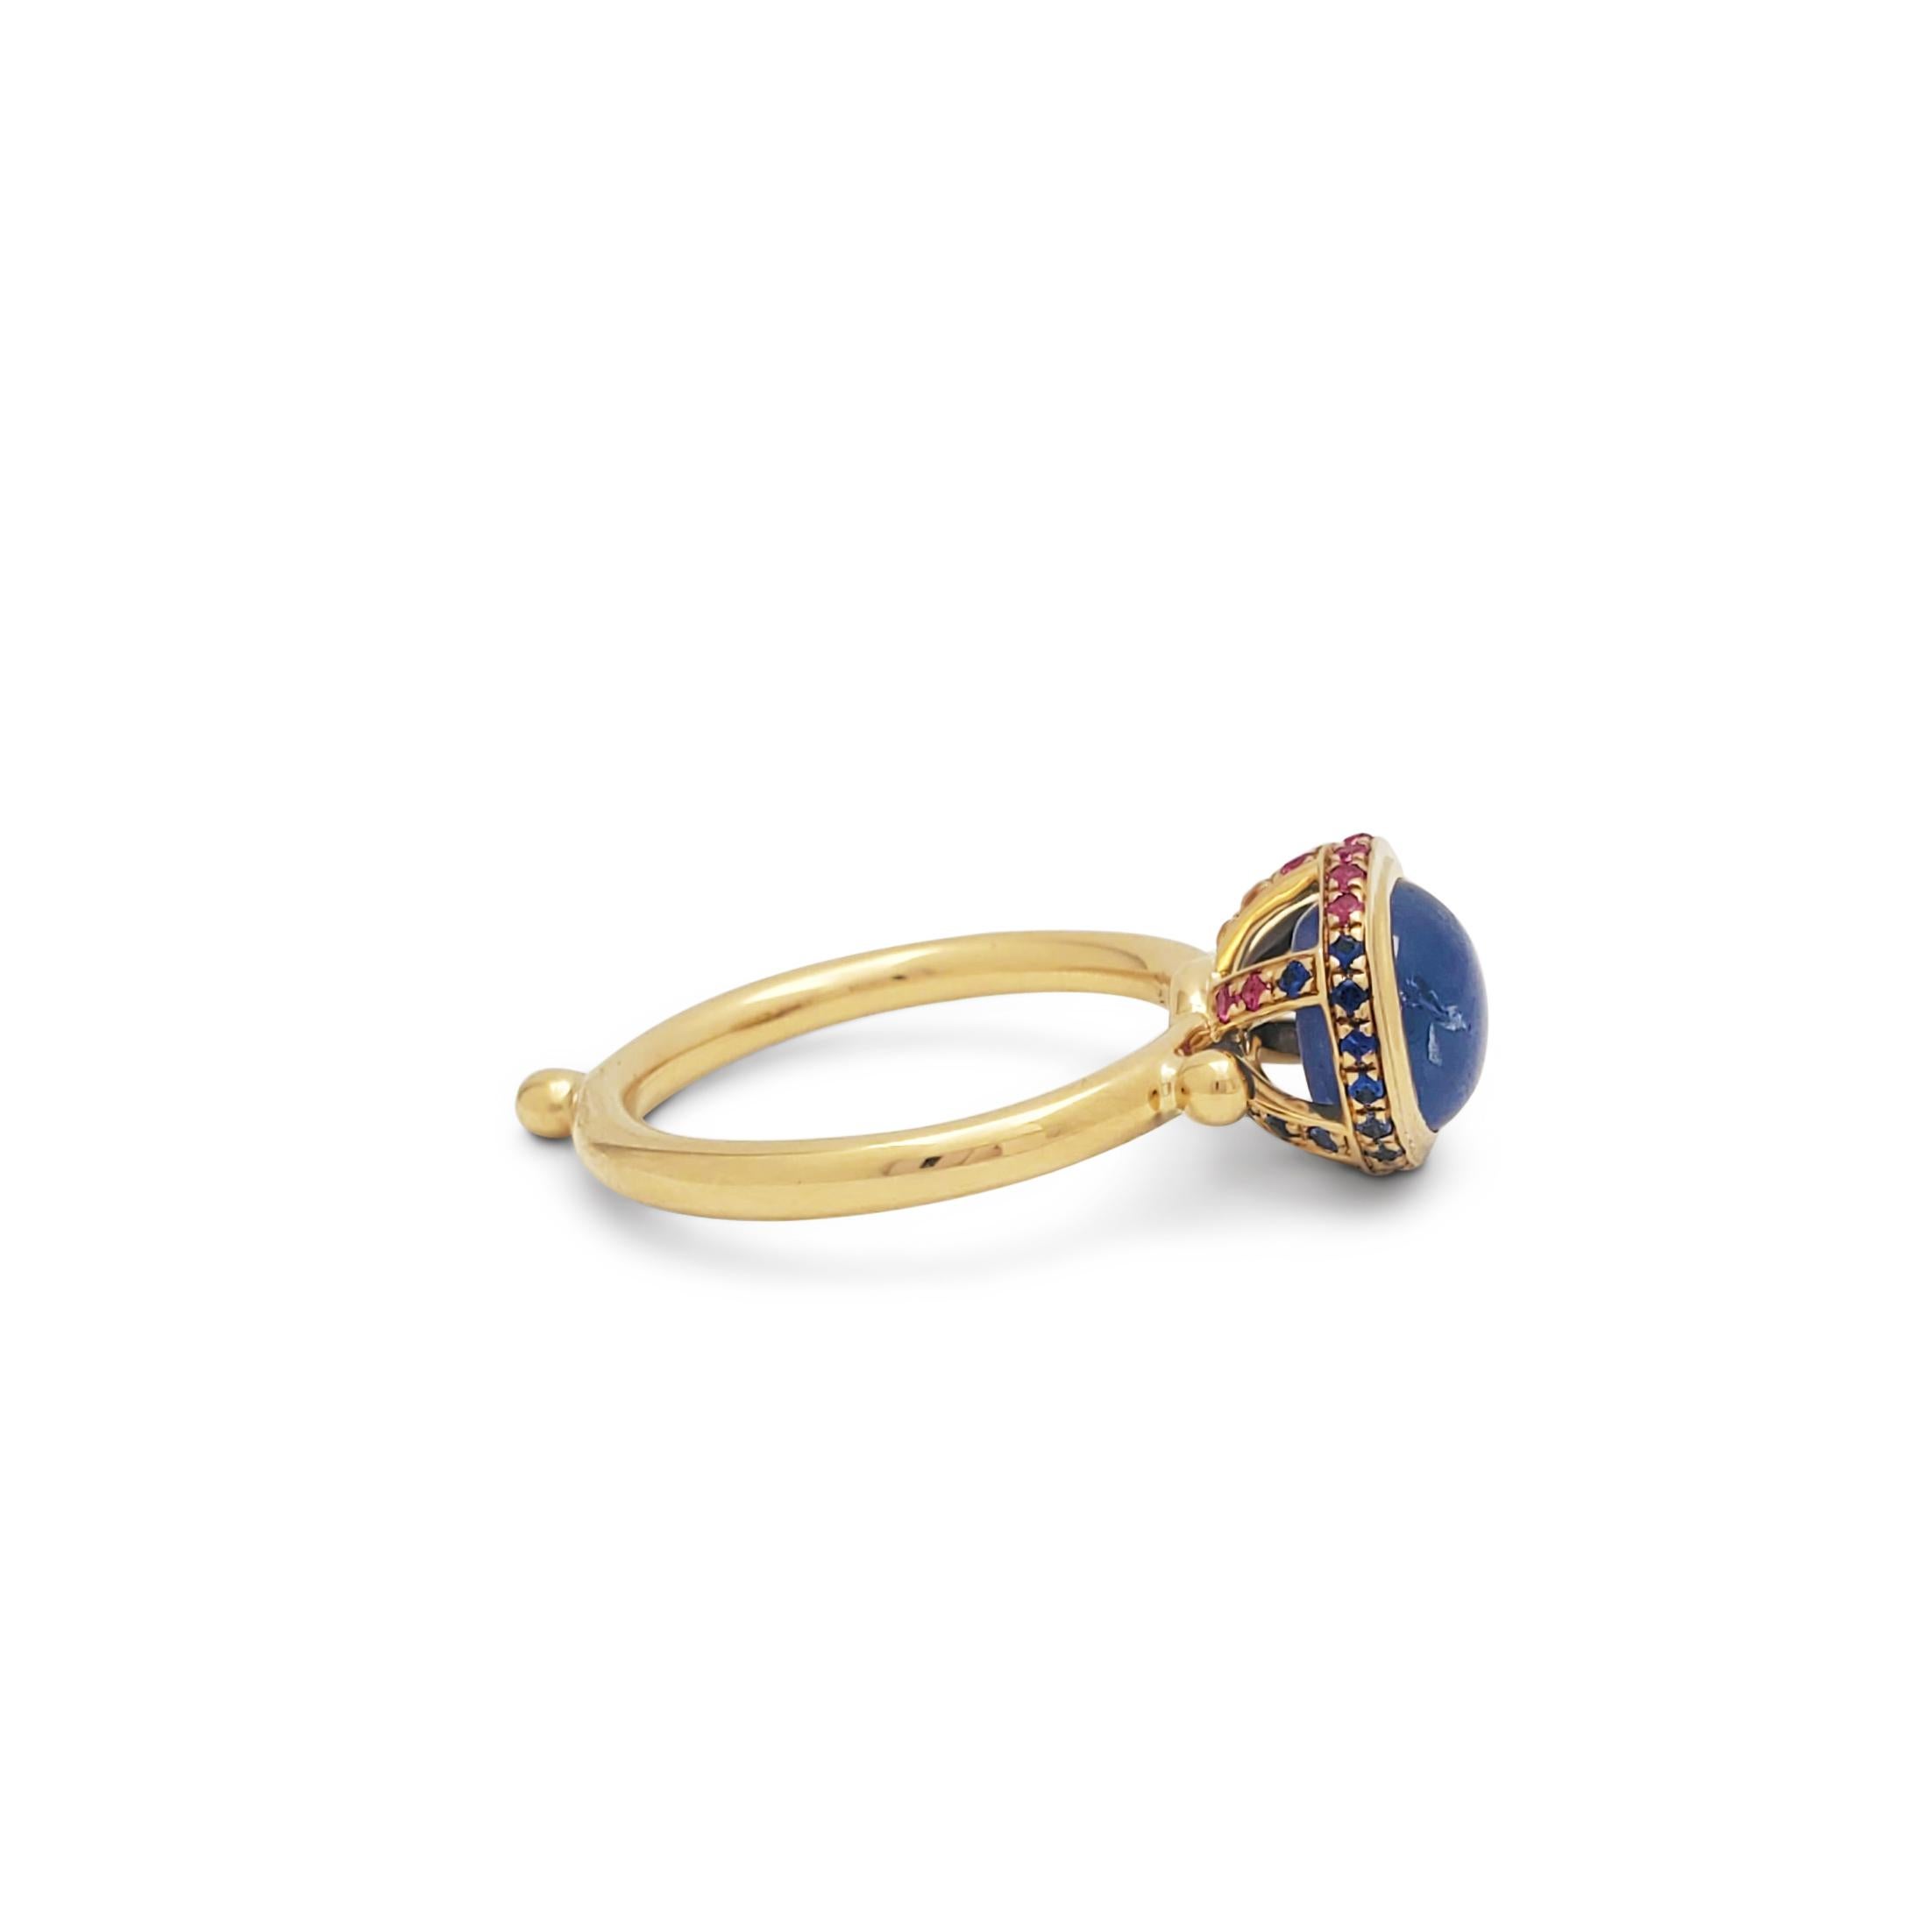 Authentic Temple St. Clair ring crafted in 18 karat yellow gold.  A bezel set cabochon iolite sits at the center of the ring surrounded by a basket of multicolor gemstones.  Size 5.  Stamped 750 and signed with the Temple St. Clair maker's mark. 